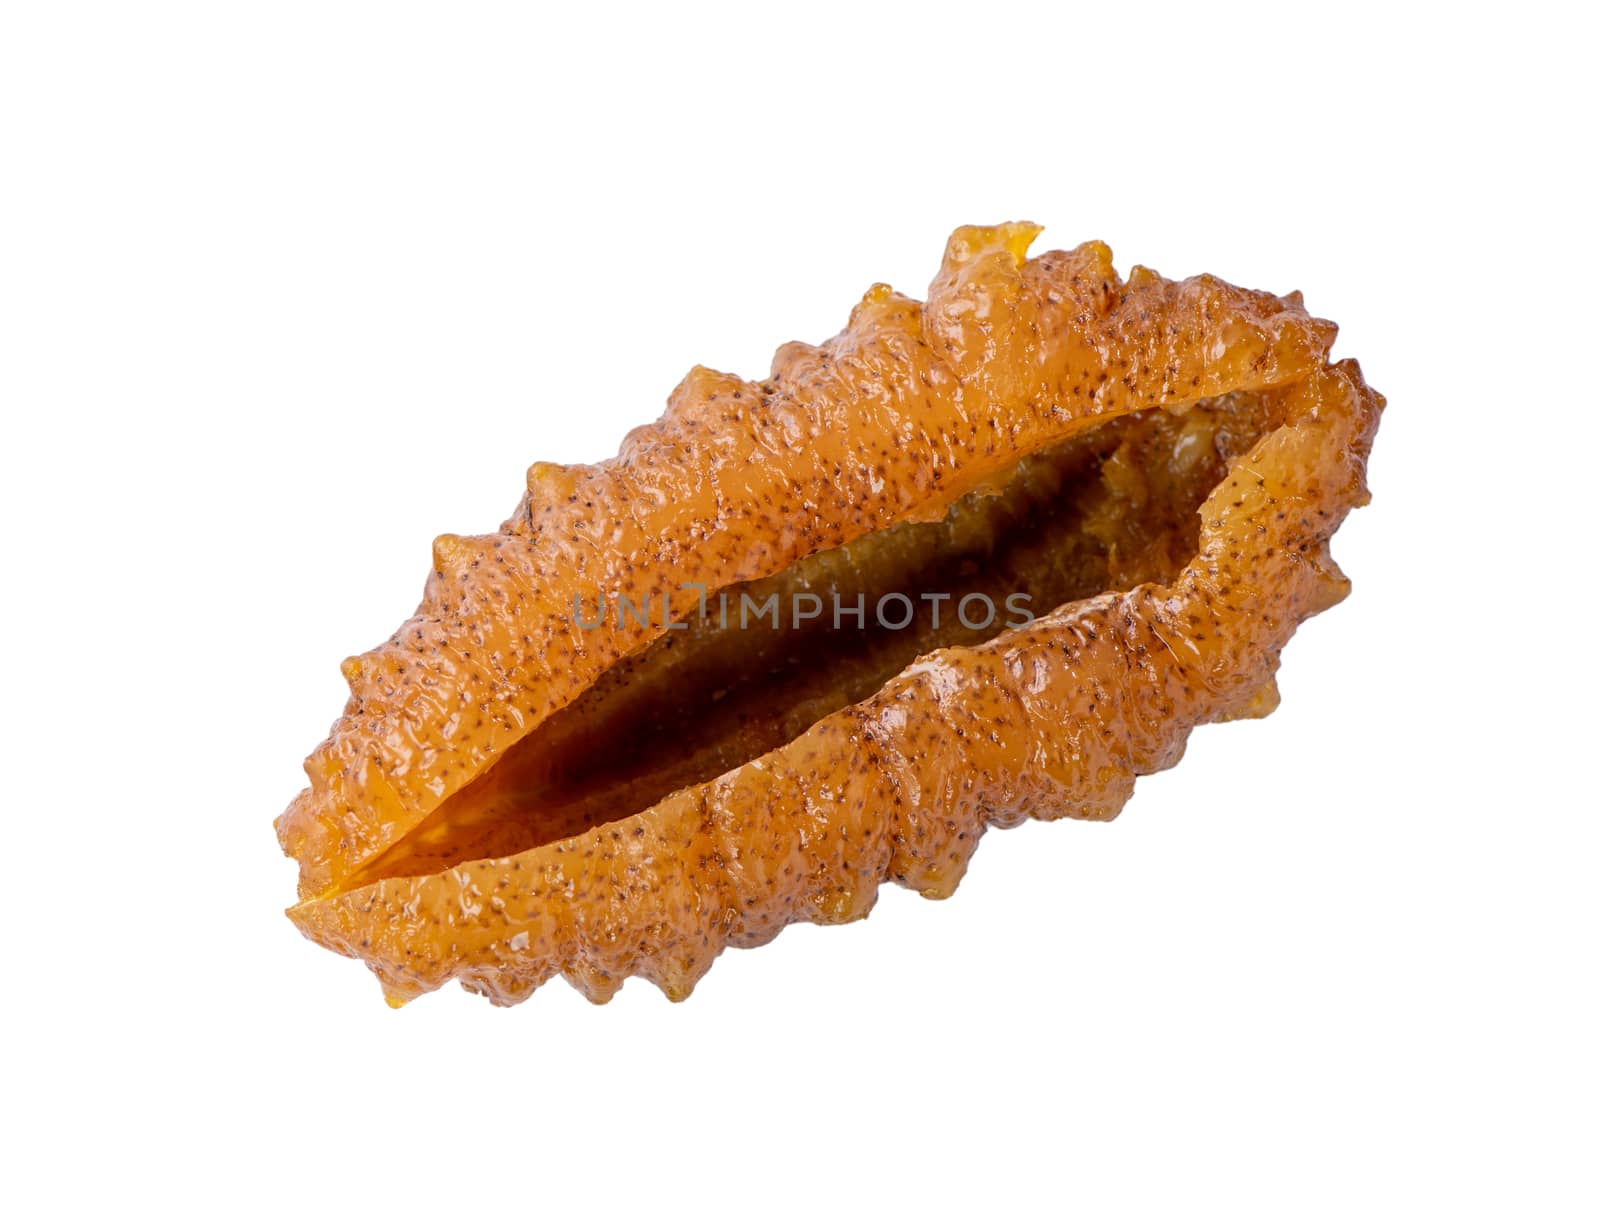 Beautiful sea cucumber seafood isolated on white background, clipping path, cut out, close up.